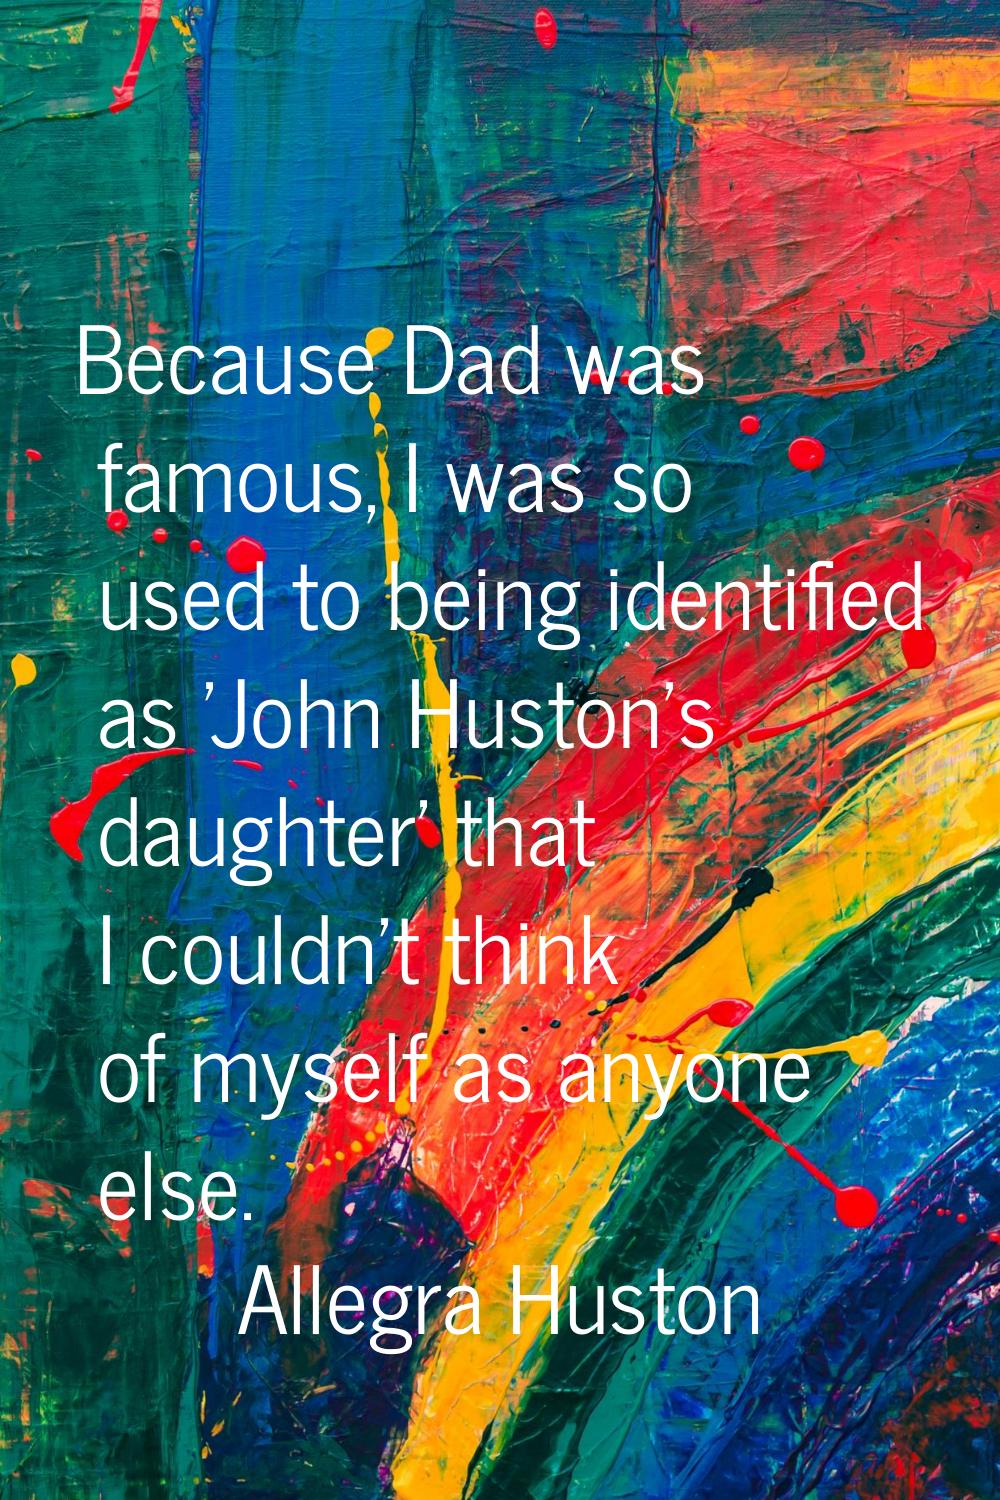 Because Dad was famous, I was so used to being identified as 'John Huston's daughter' that I couldn